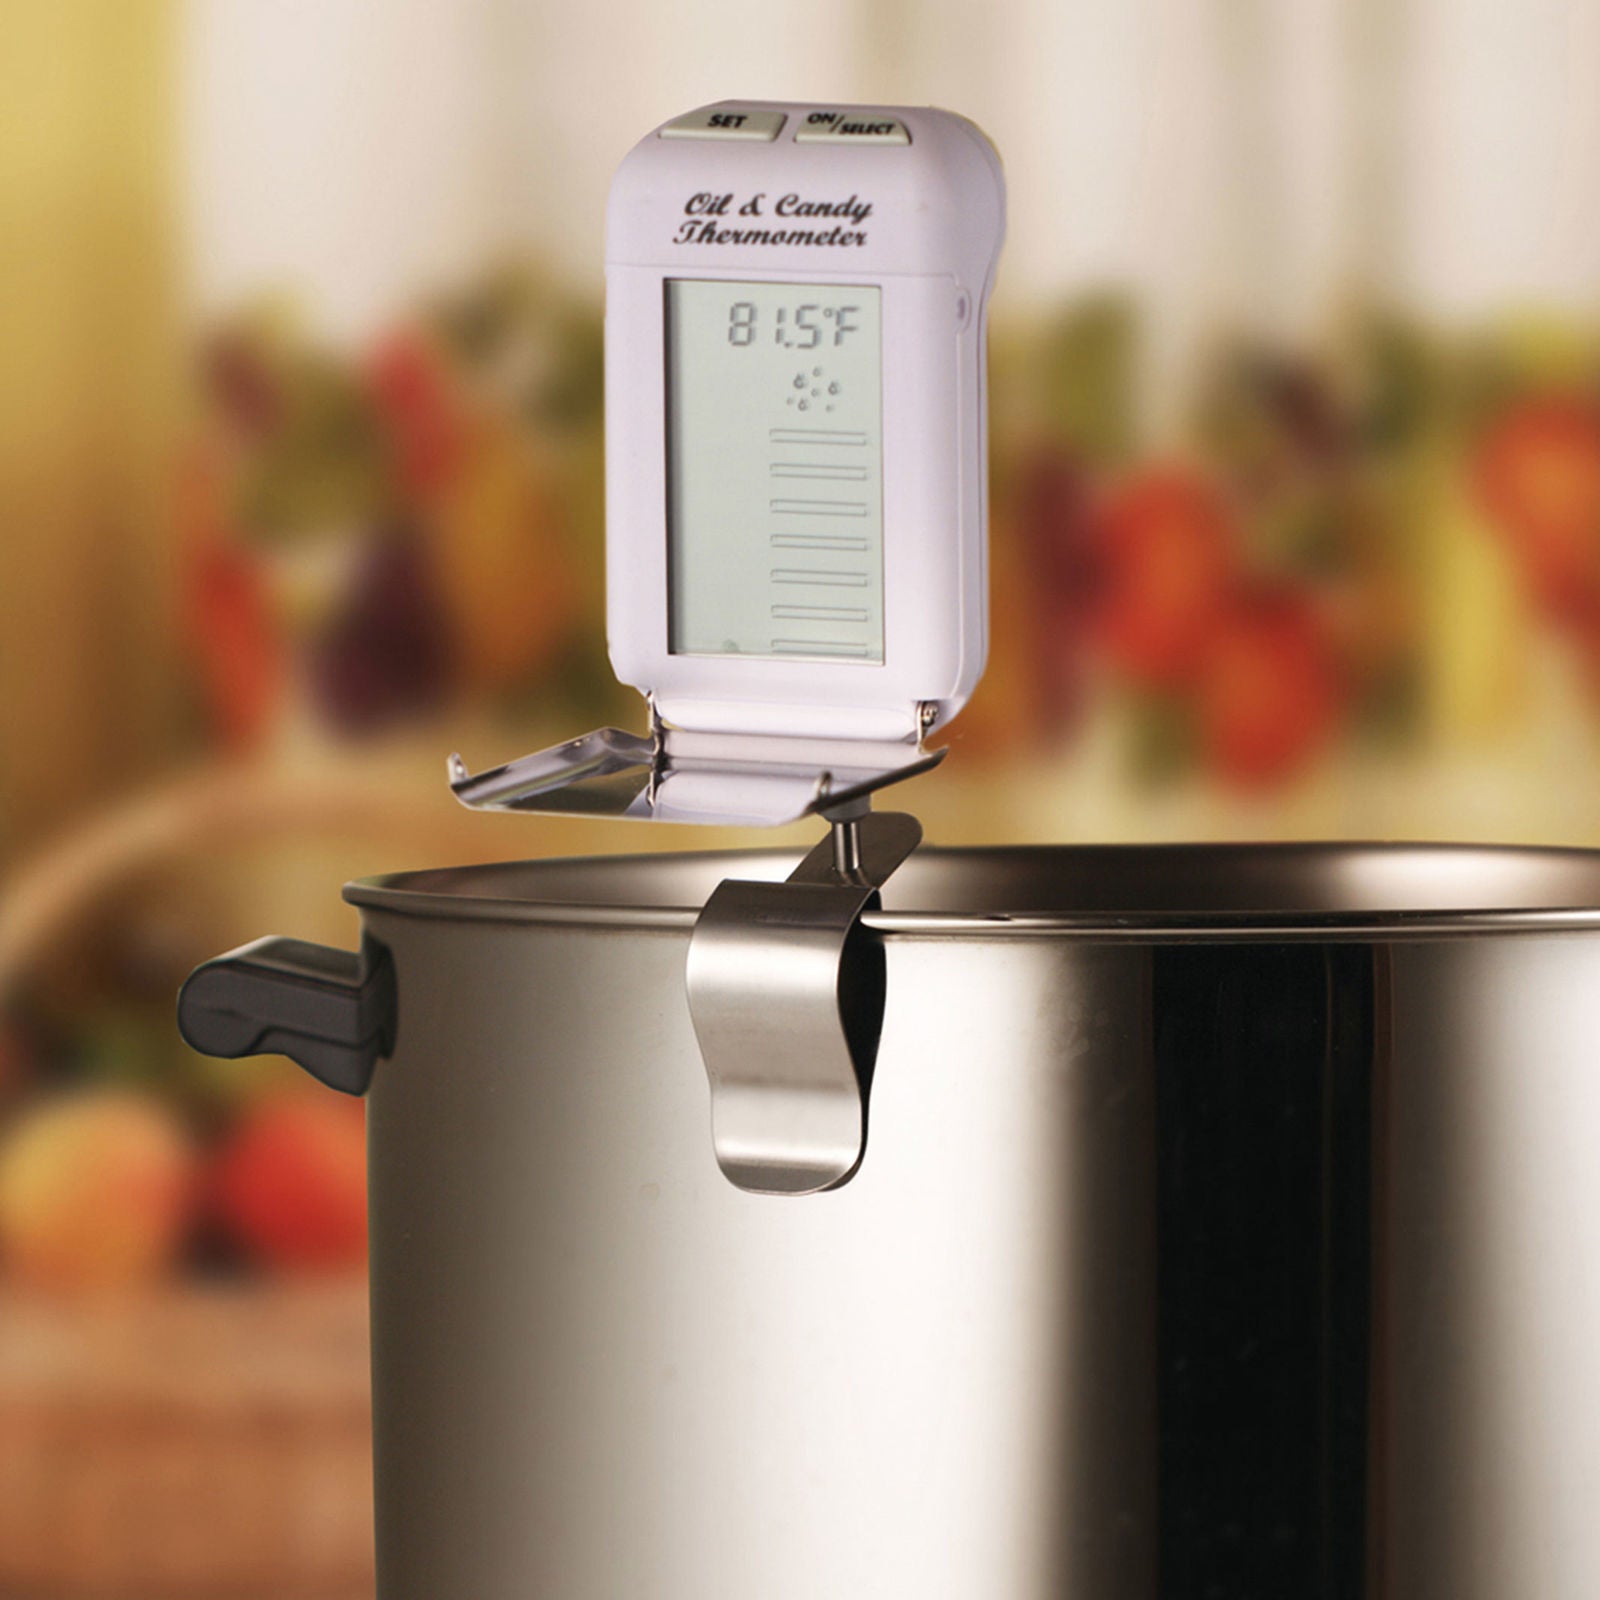 Digital Candy Thermometer w/10" Stem